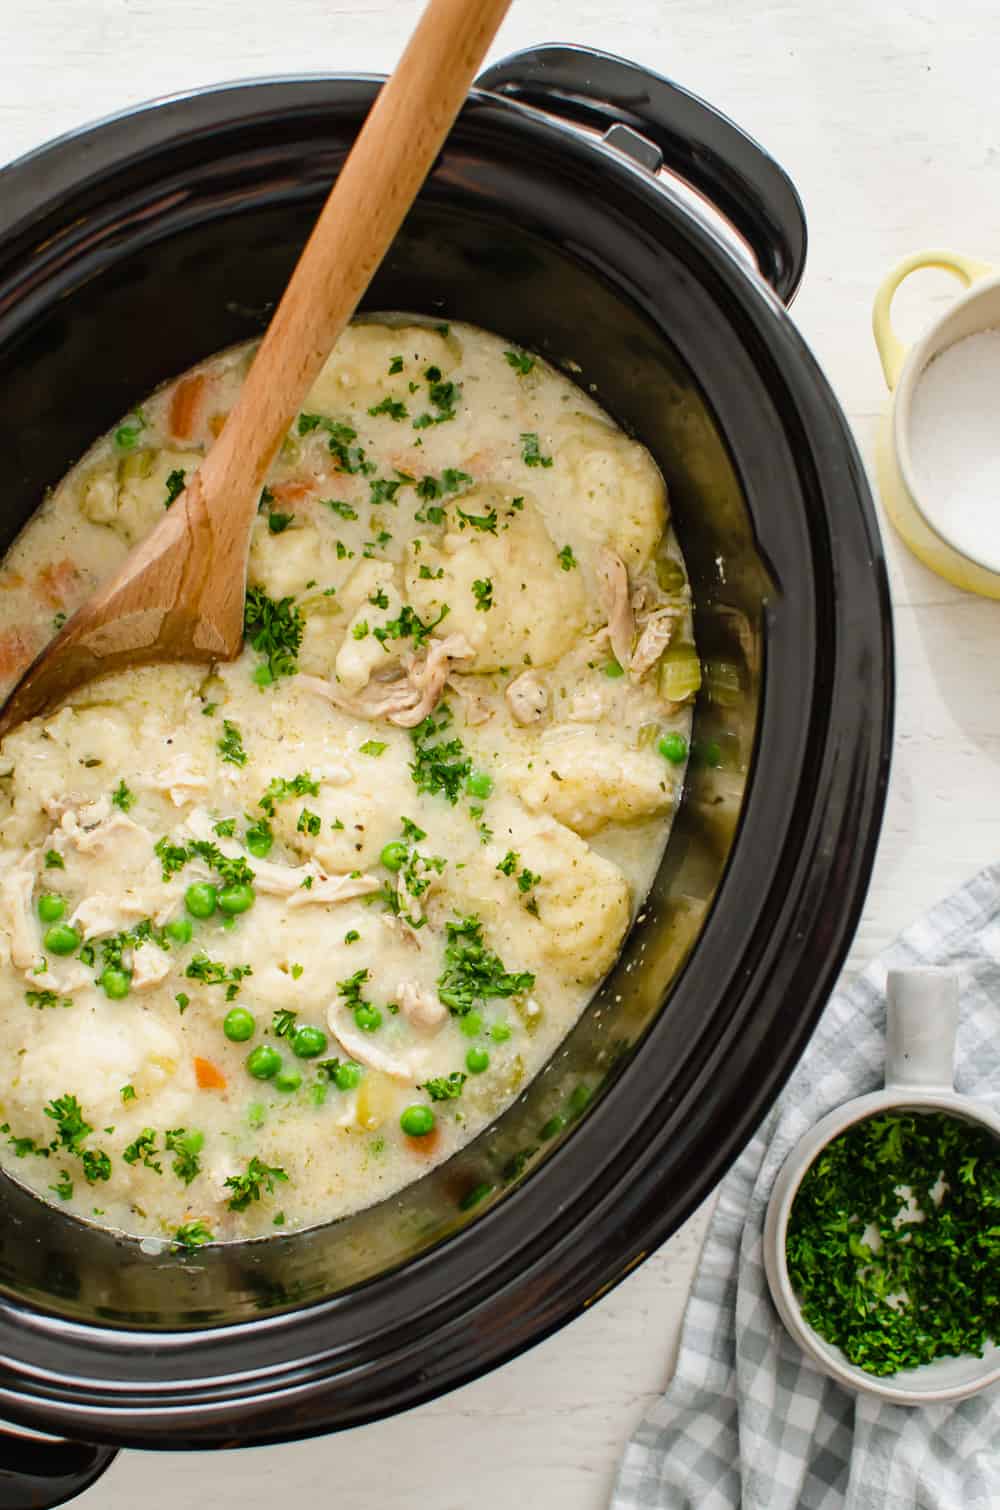 Chicken and dumplings in the crock pot ready to serve with chopped fresh parsley on top.